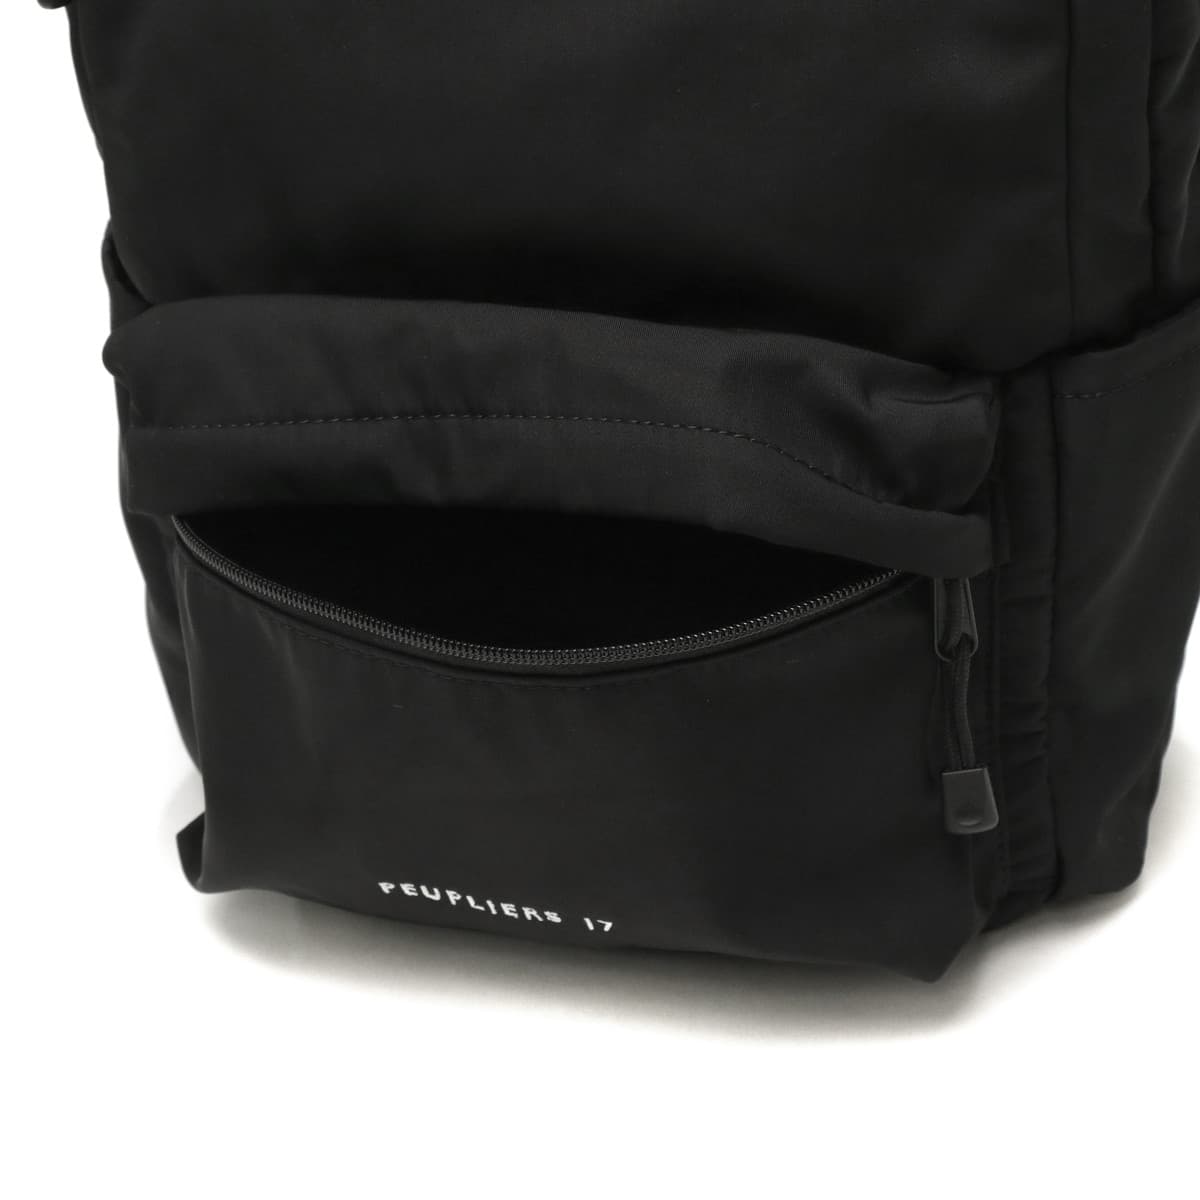 DANTON ダントン POLYESTER TWILL BACKPACK リュック A4 PEUPLIERS 17